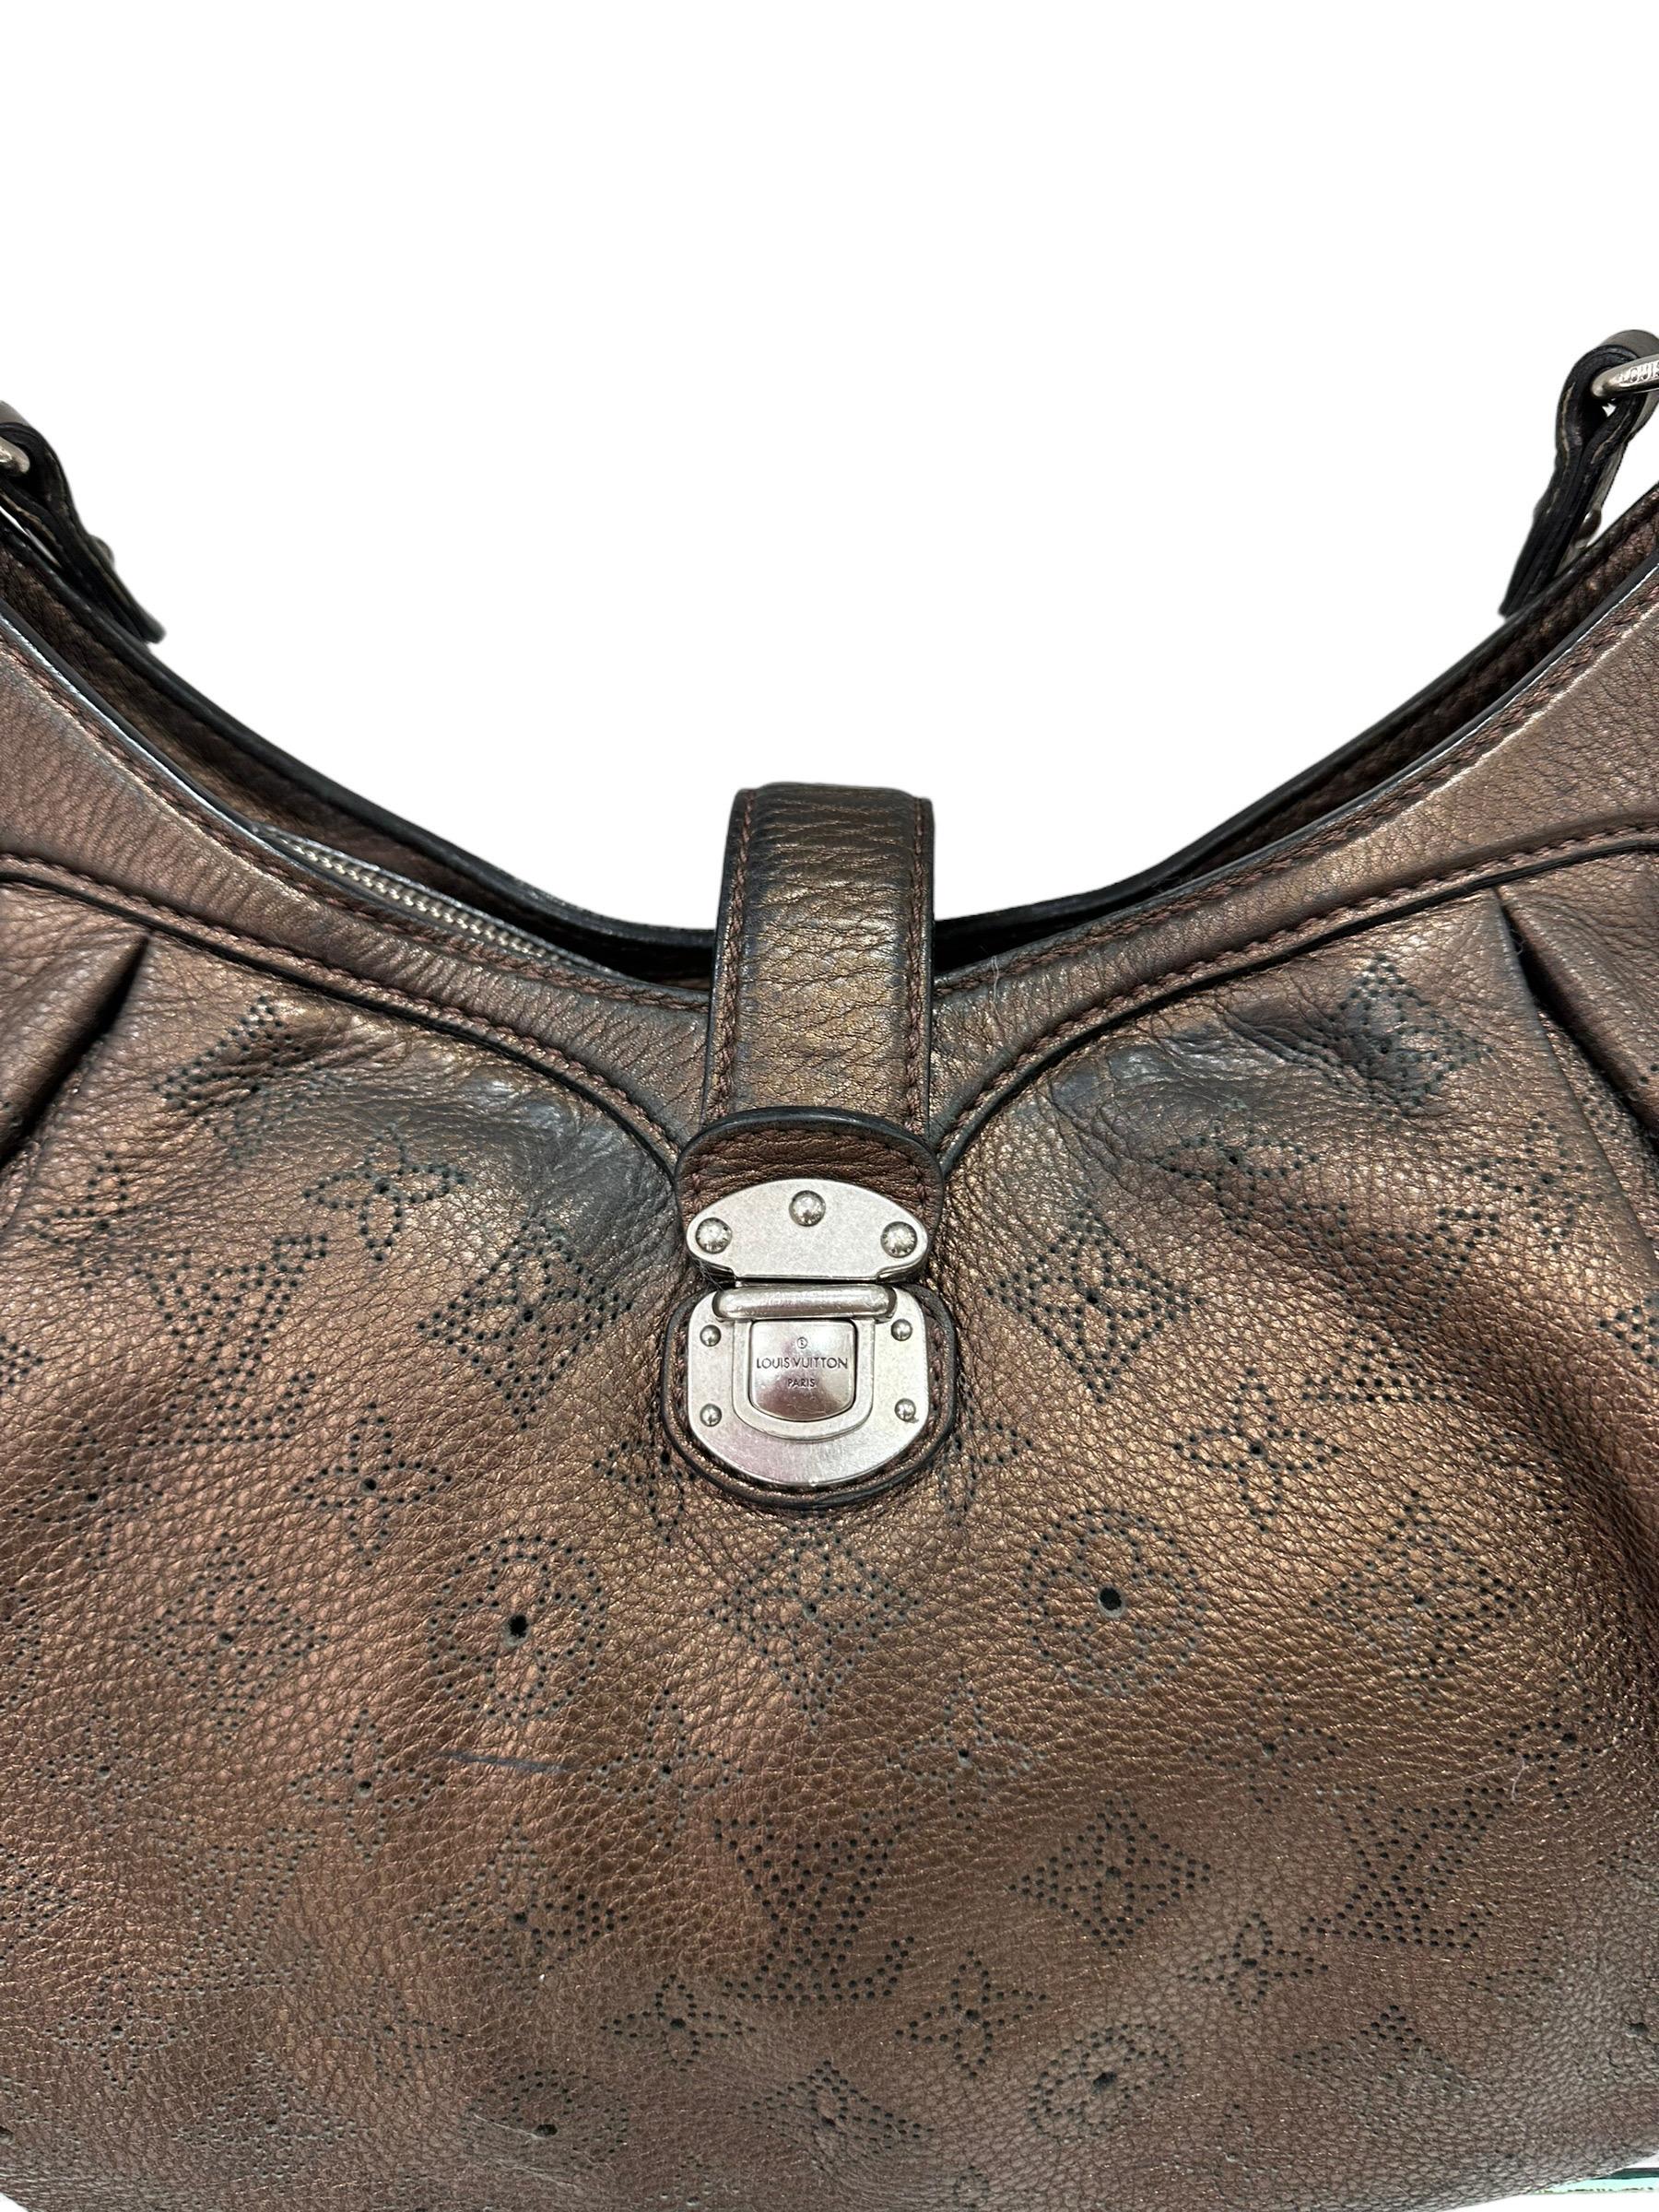 Louis Vuitton signed bag, Mahina model, size XS, made of brown leather with perforated Monogram and silver hardware. Equipped with a central interlocking closure. Equipped with an adjustable shoulder strap to wear it comfortably on the shoulder and